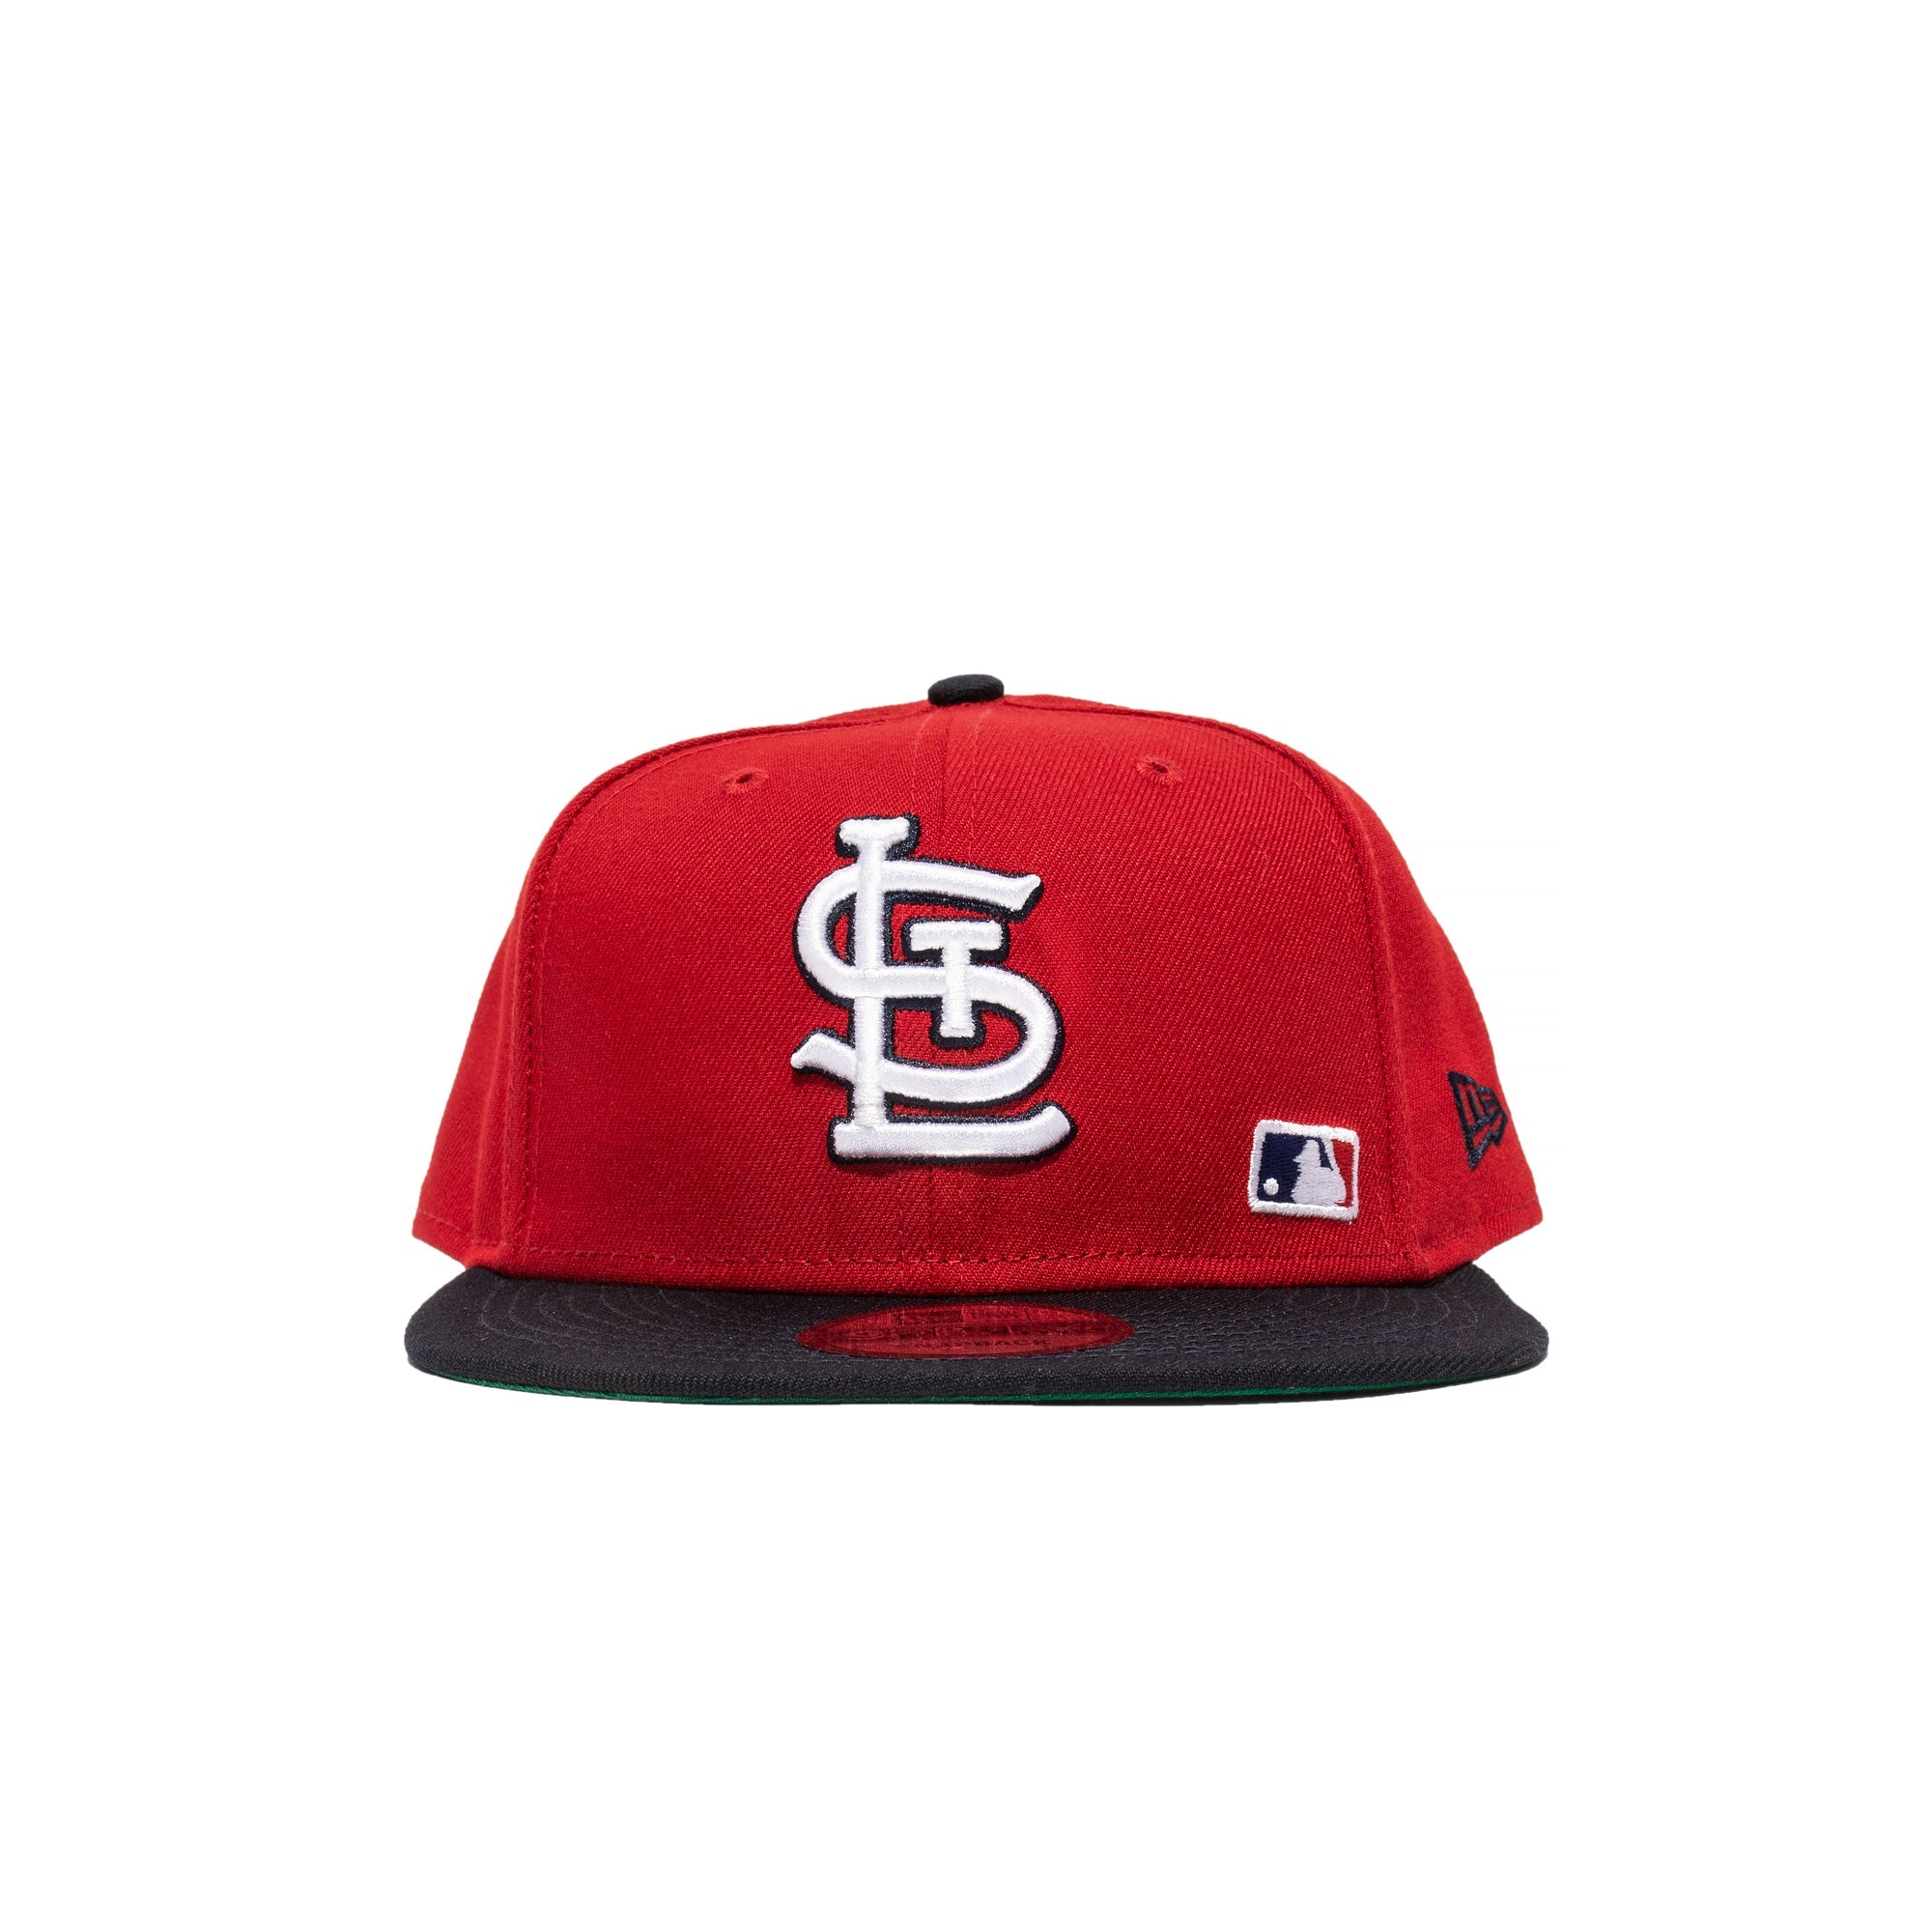 New Era Backletter Arch 9FIFTY St Louis Cardinals Snapback Hat